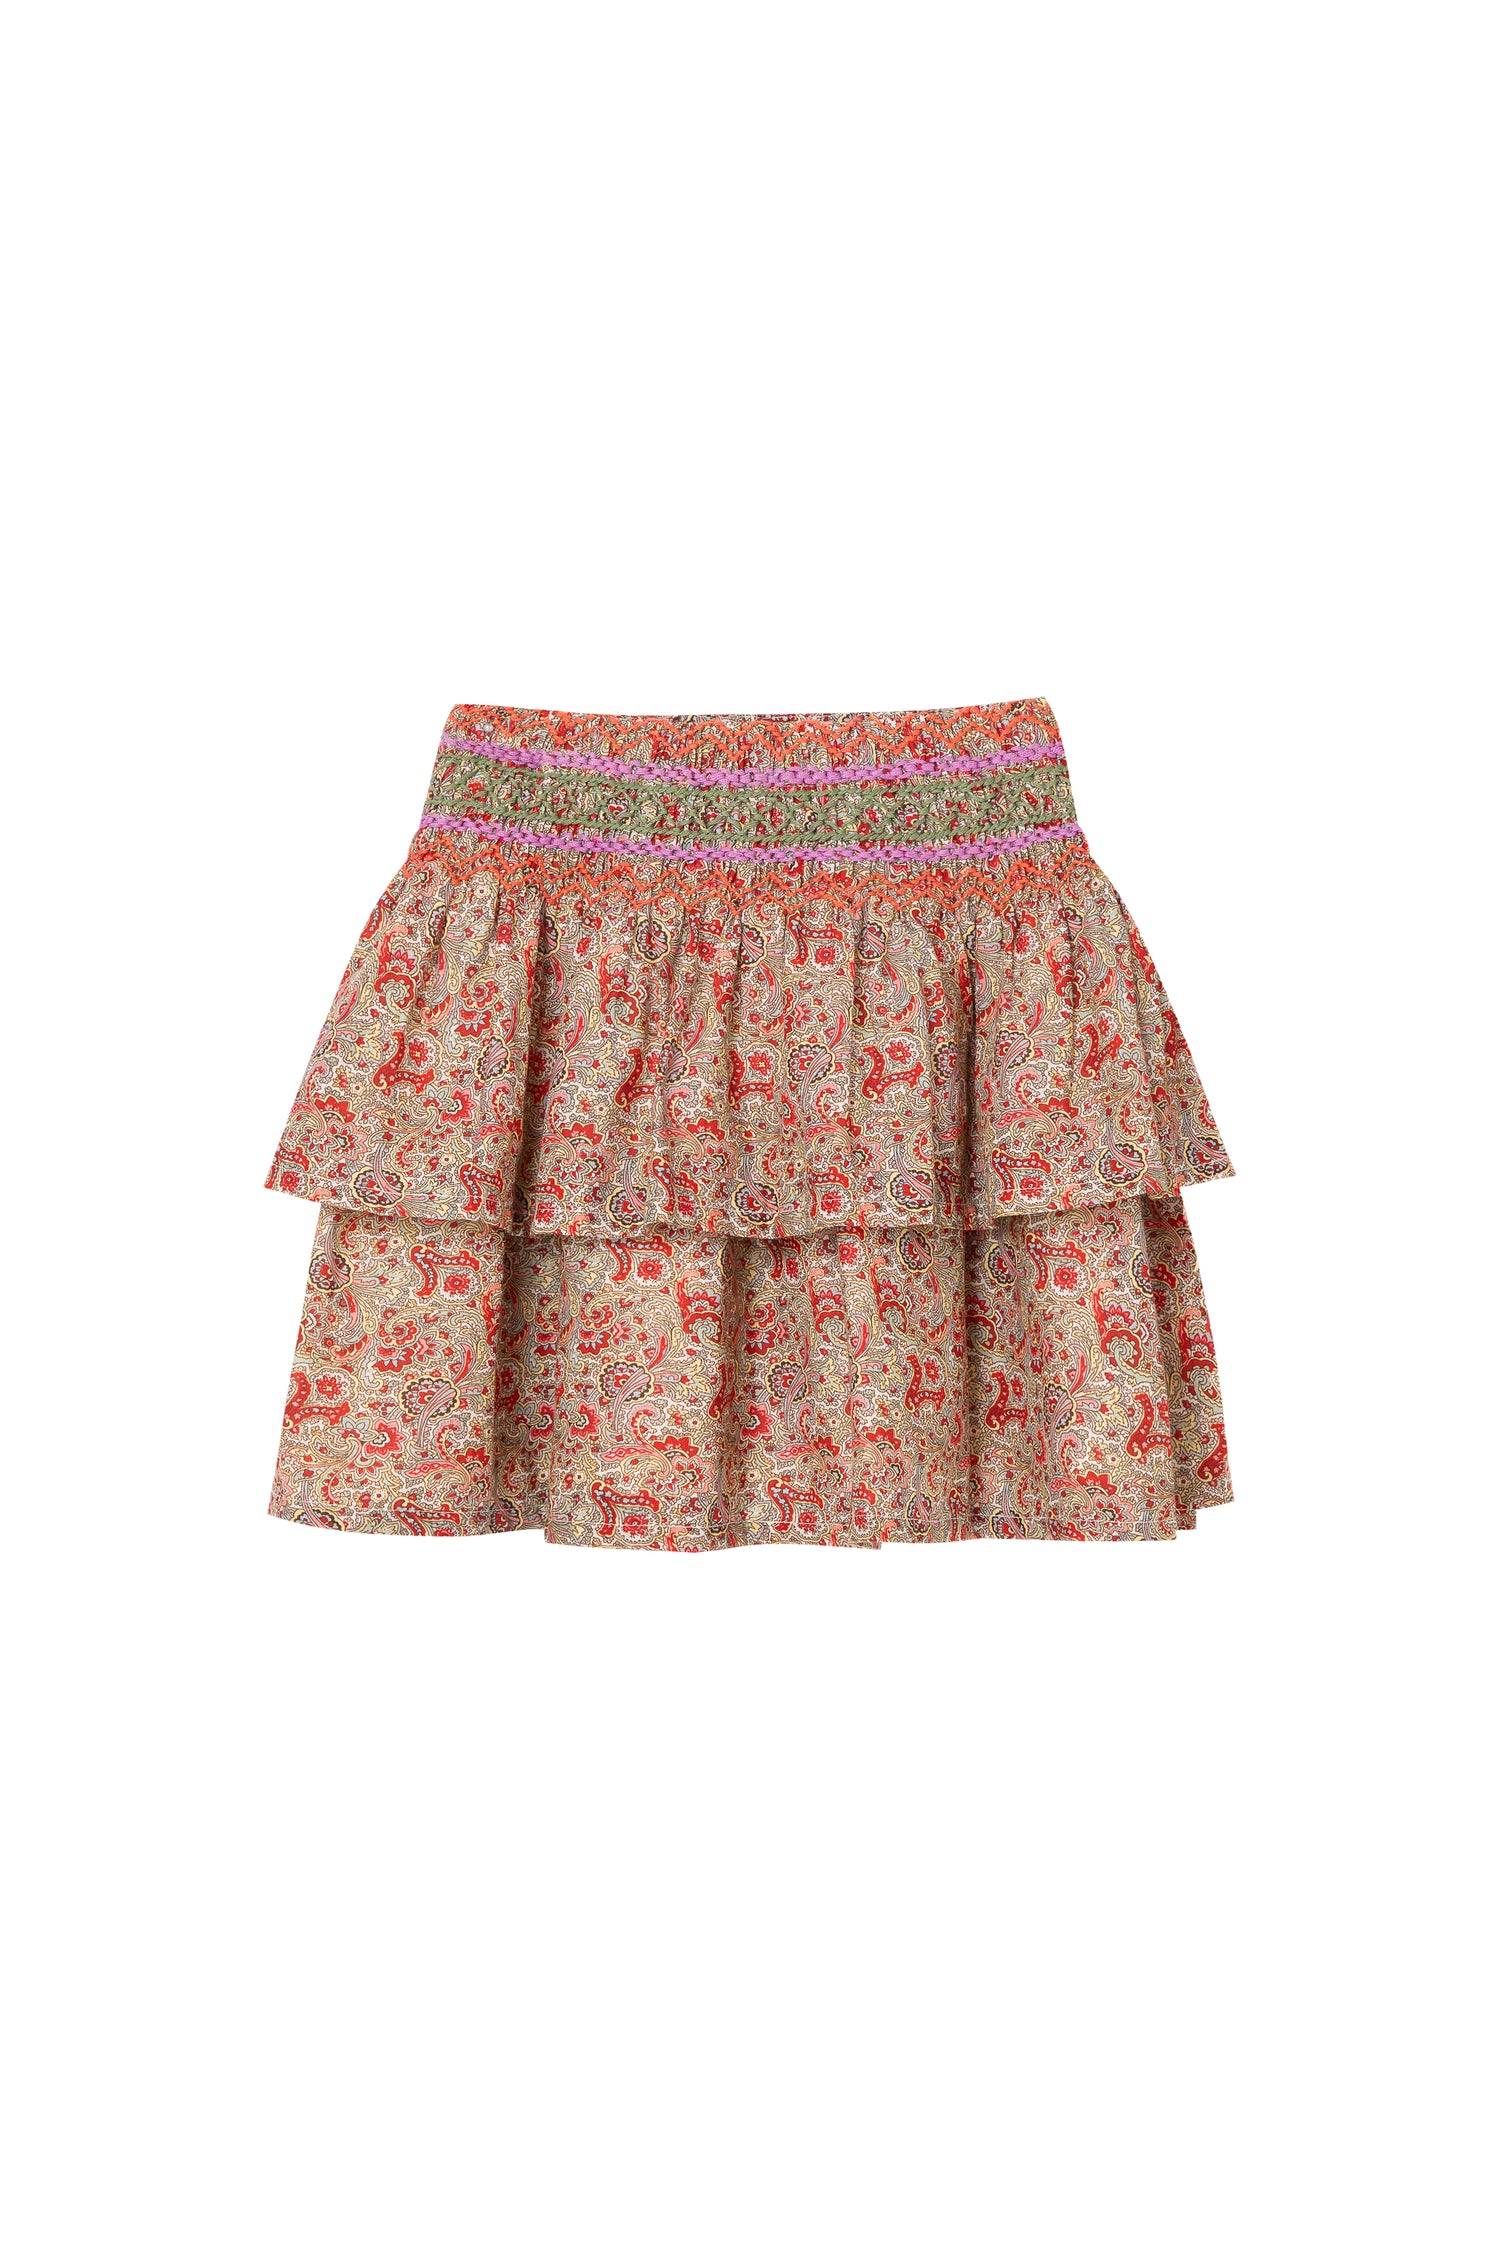 Back view of ruffled multi-colored skirt with red, pink and white 